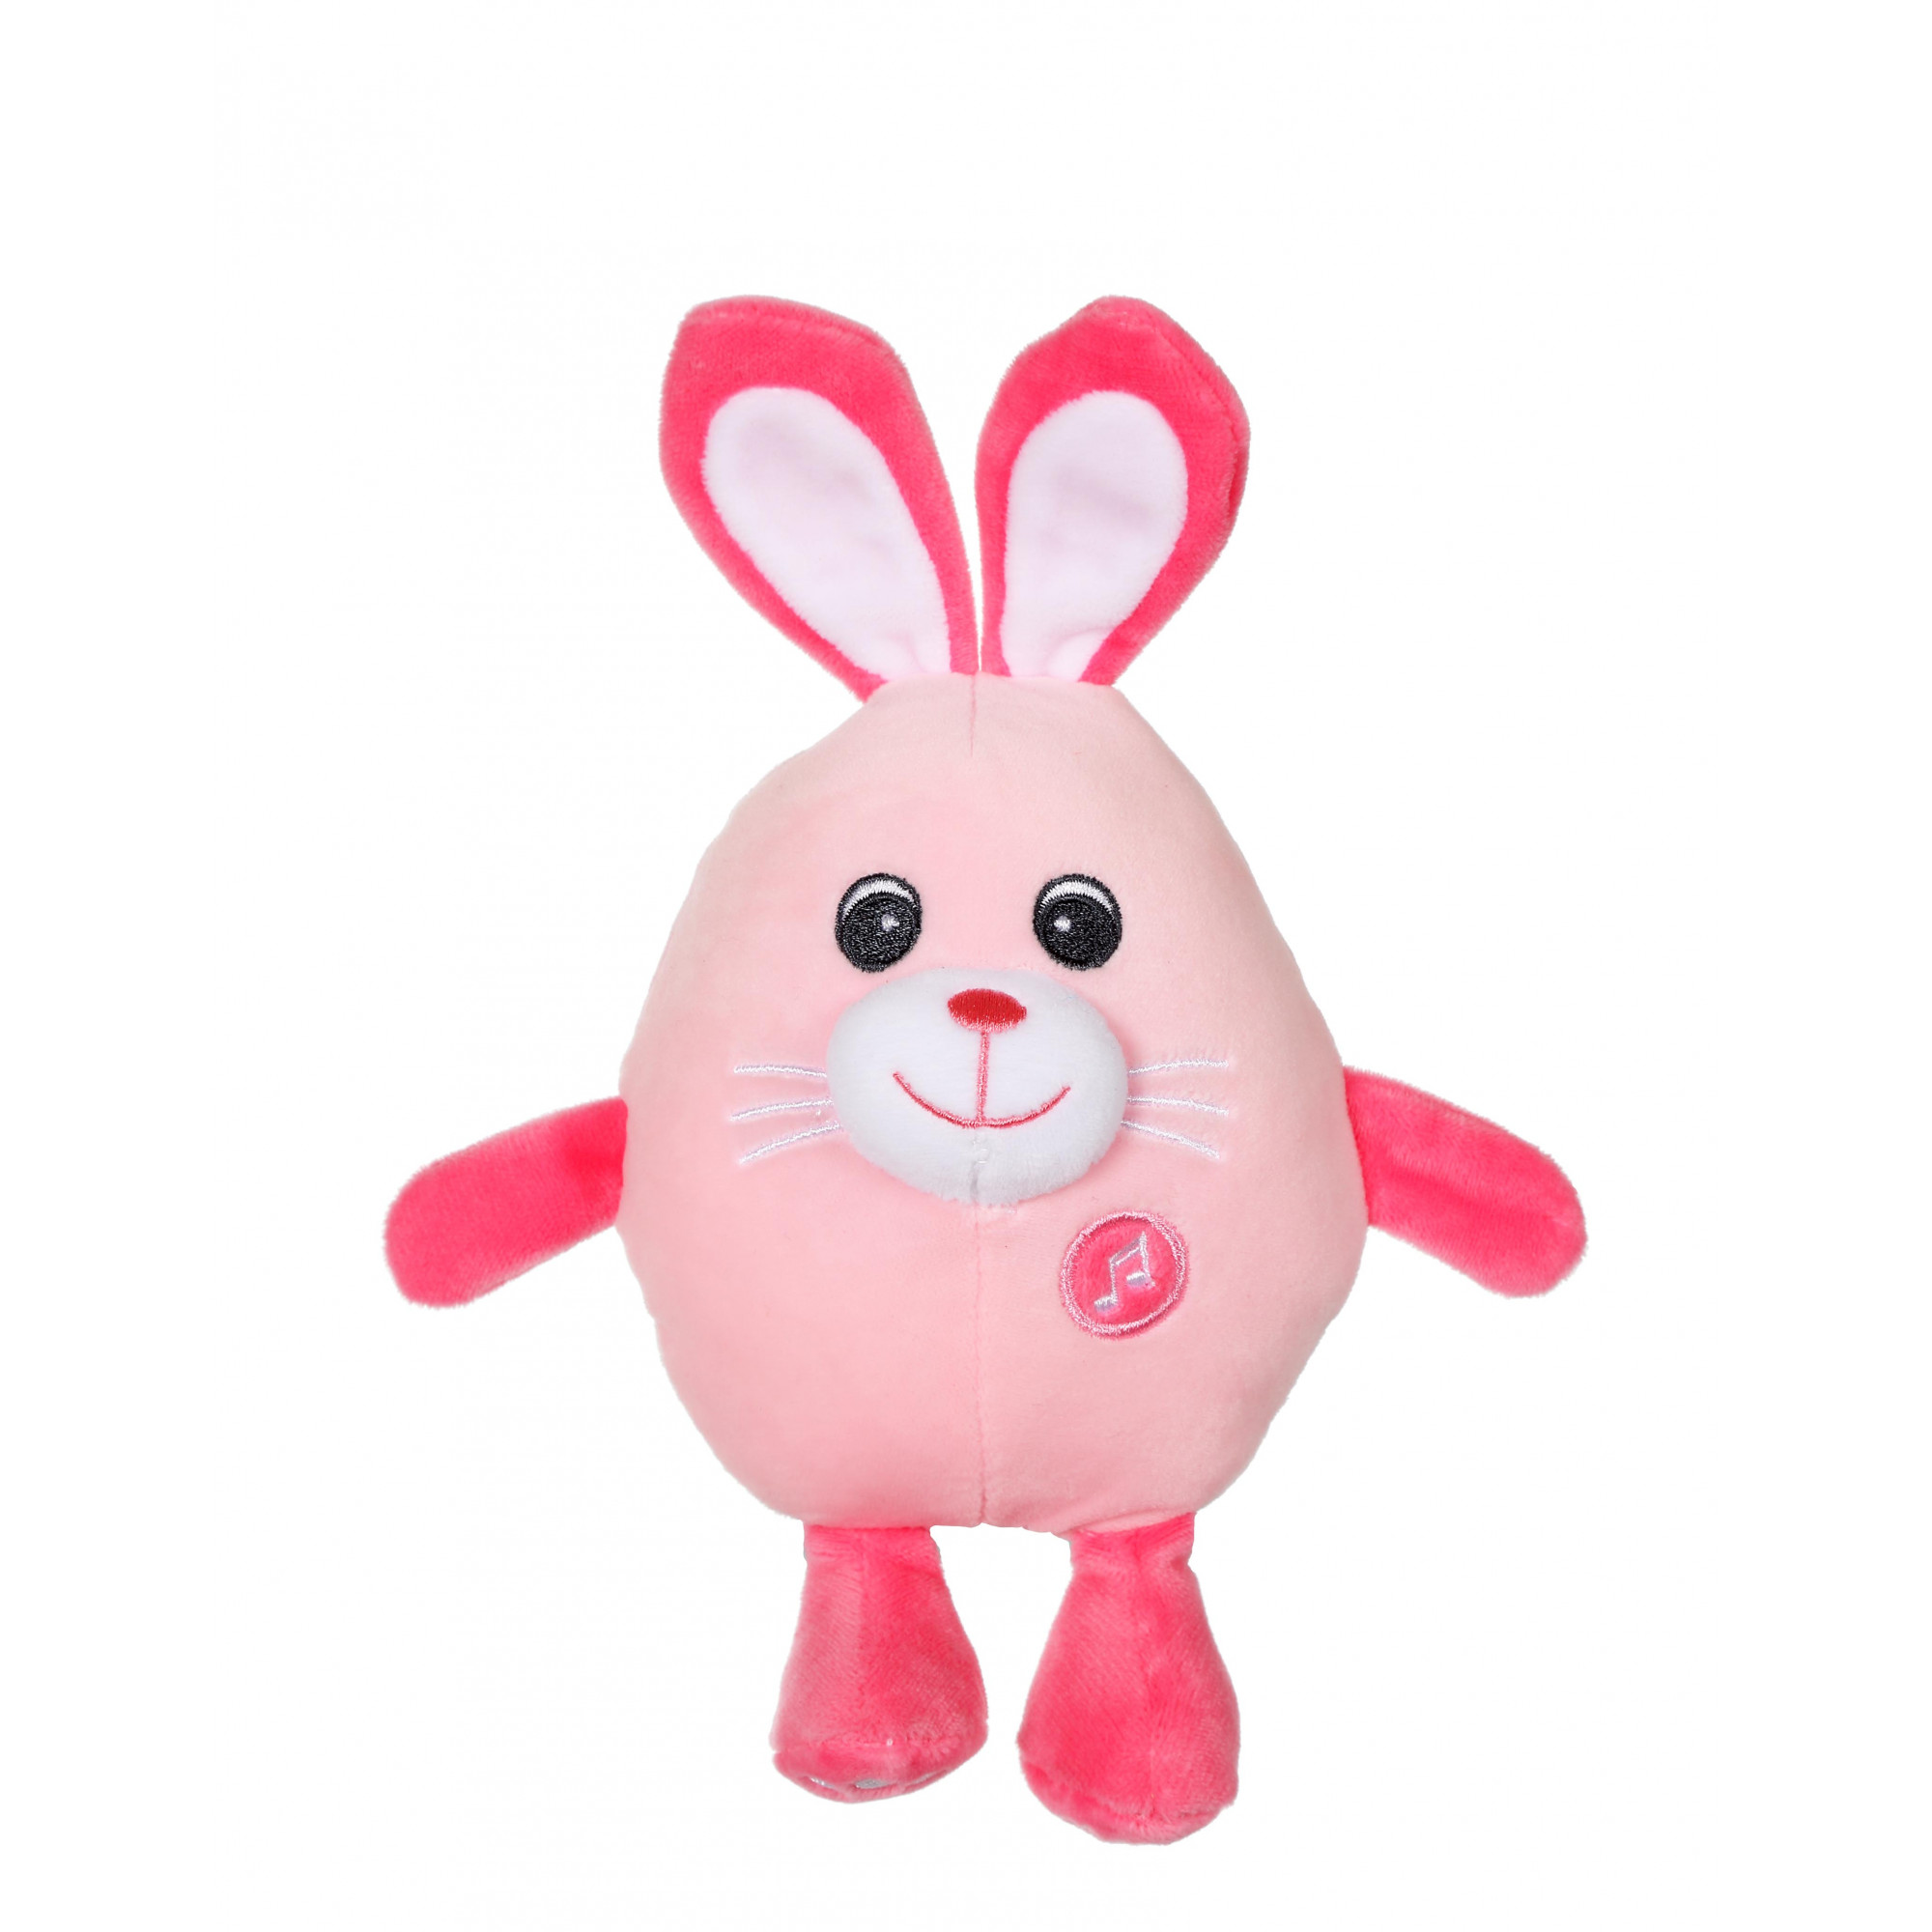 Peluche Lapin Rose I Bianochy®